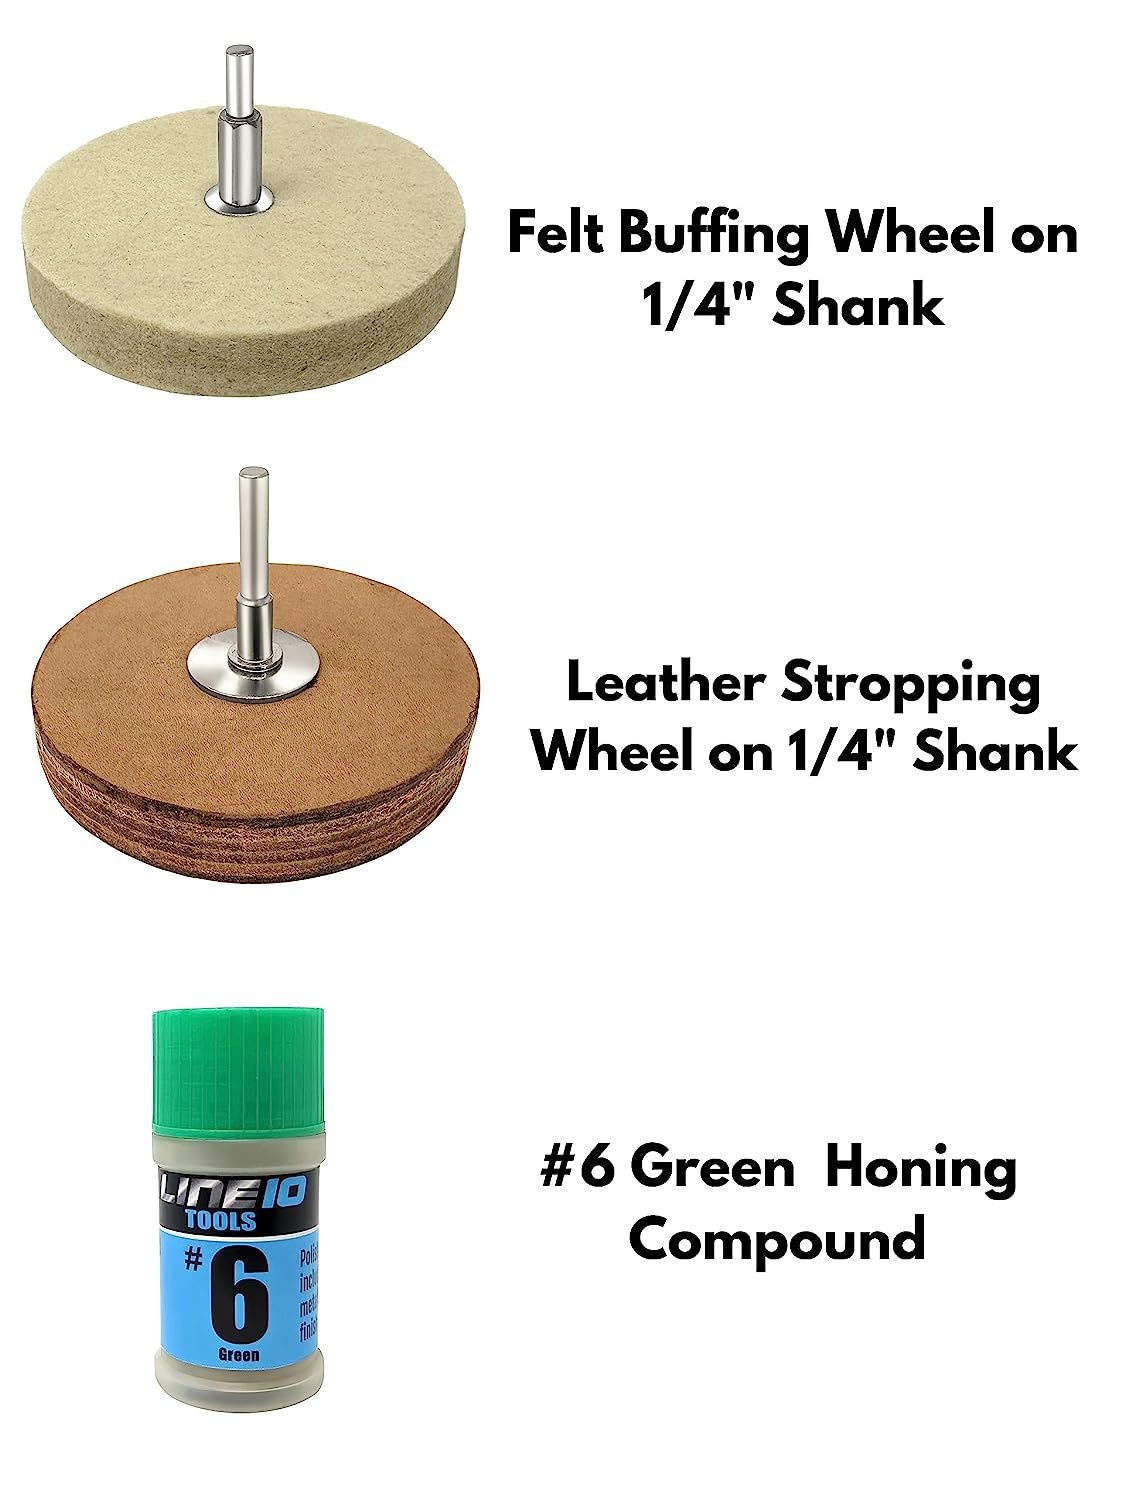 LINE10 Tools 4" Leather Strop and Felt Buffing Wheel Kit for Drill